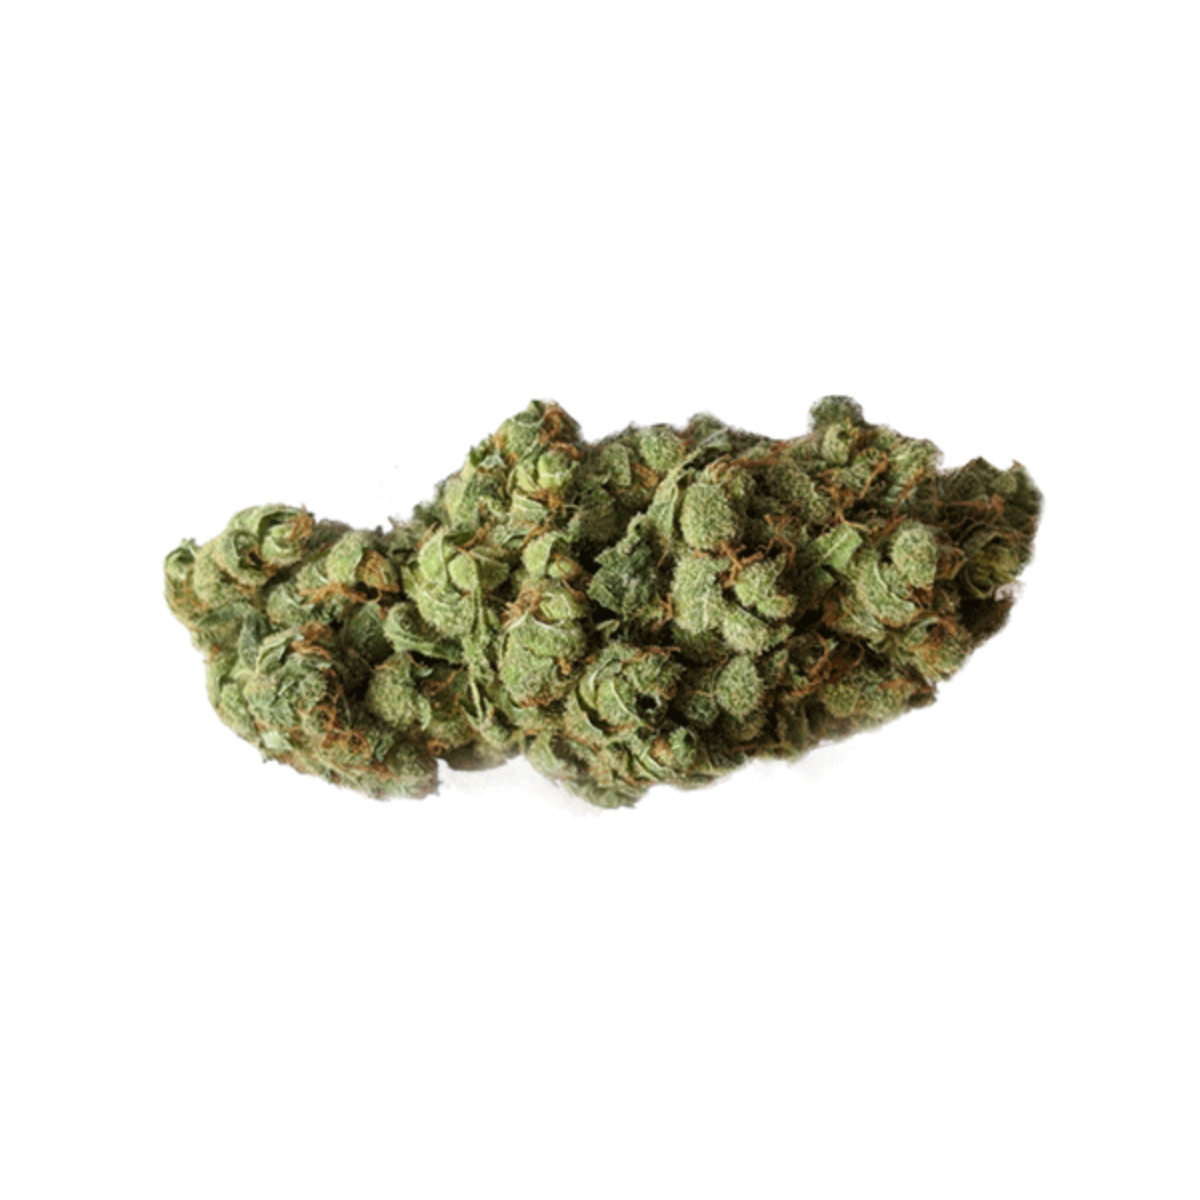 Sativa Smalls weed nugget from hotgrass.ca